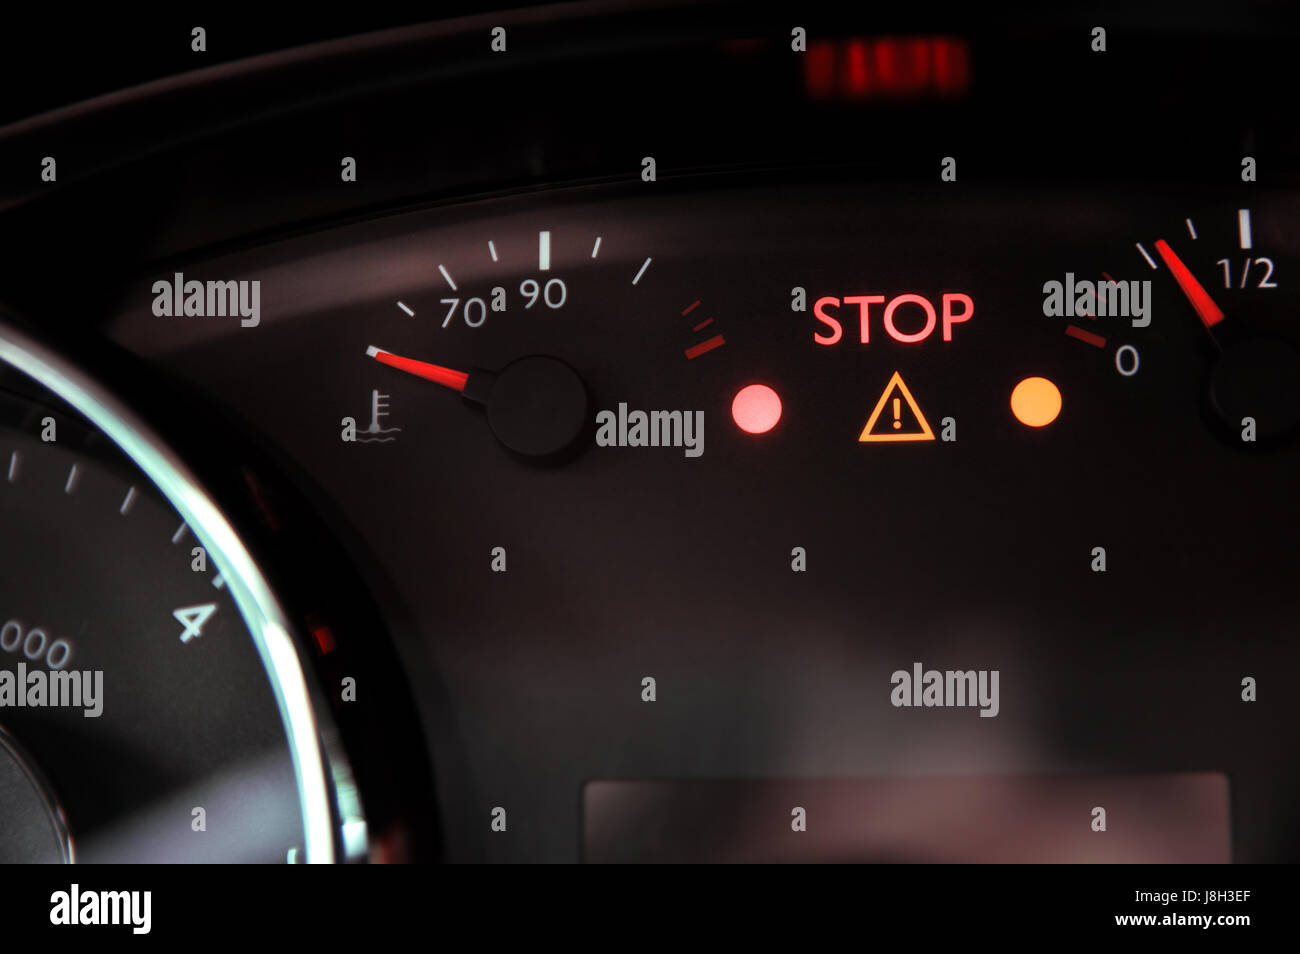 Warning triangle light and 'stop' ignite on dashboard Stock Photo